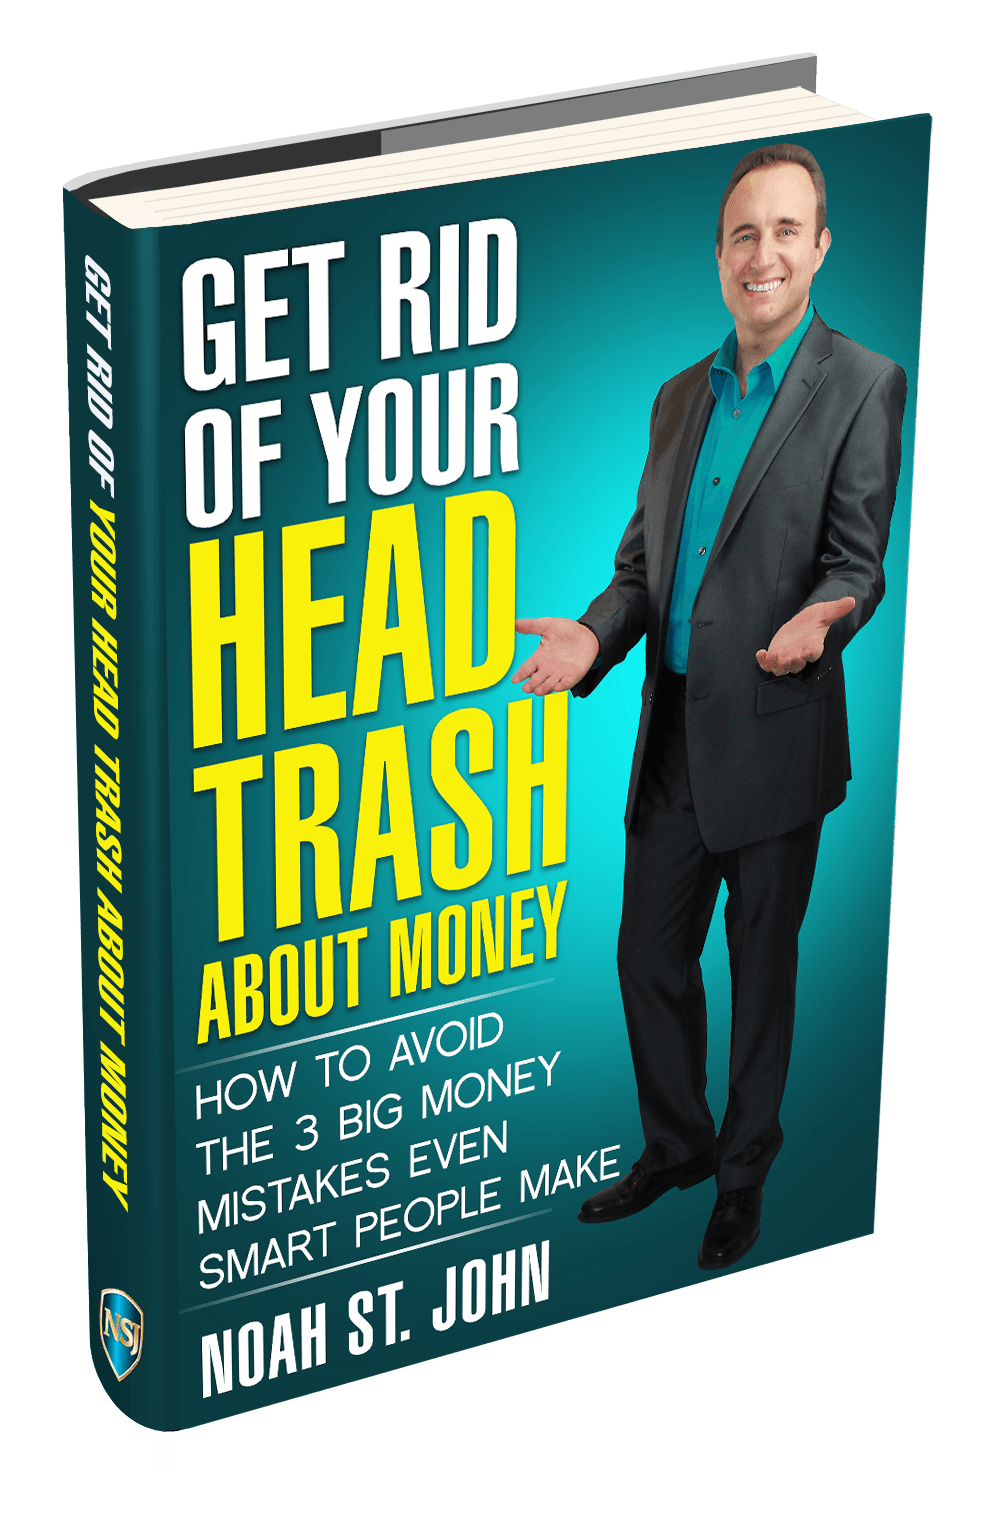 Noah St John - Get Rid of Your Head Trash About Money